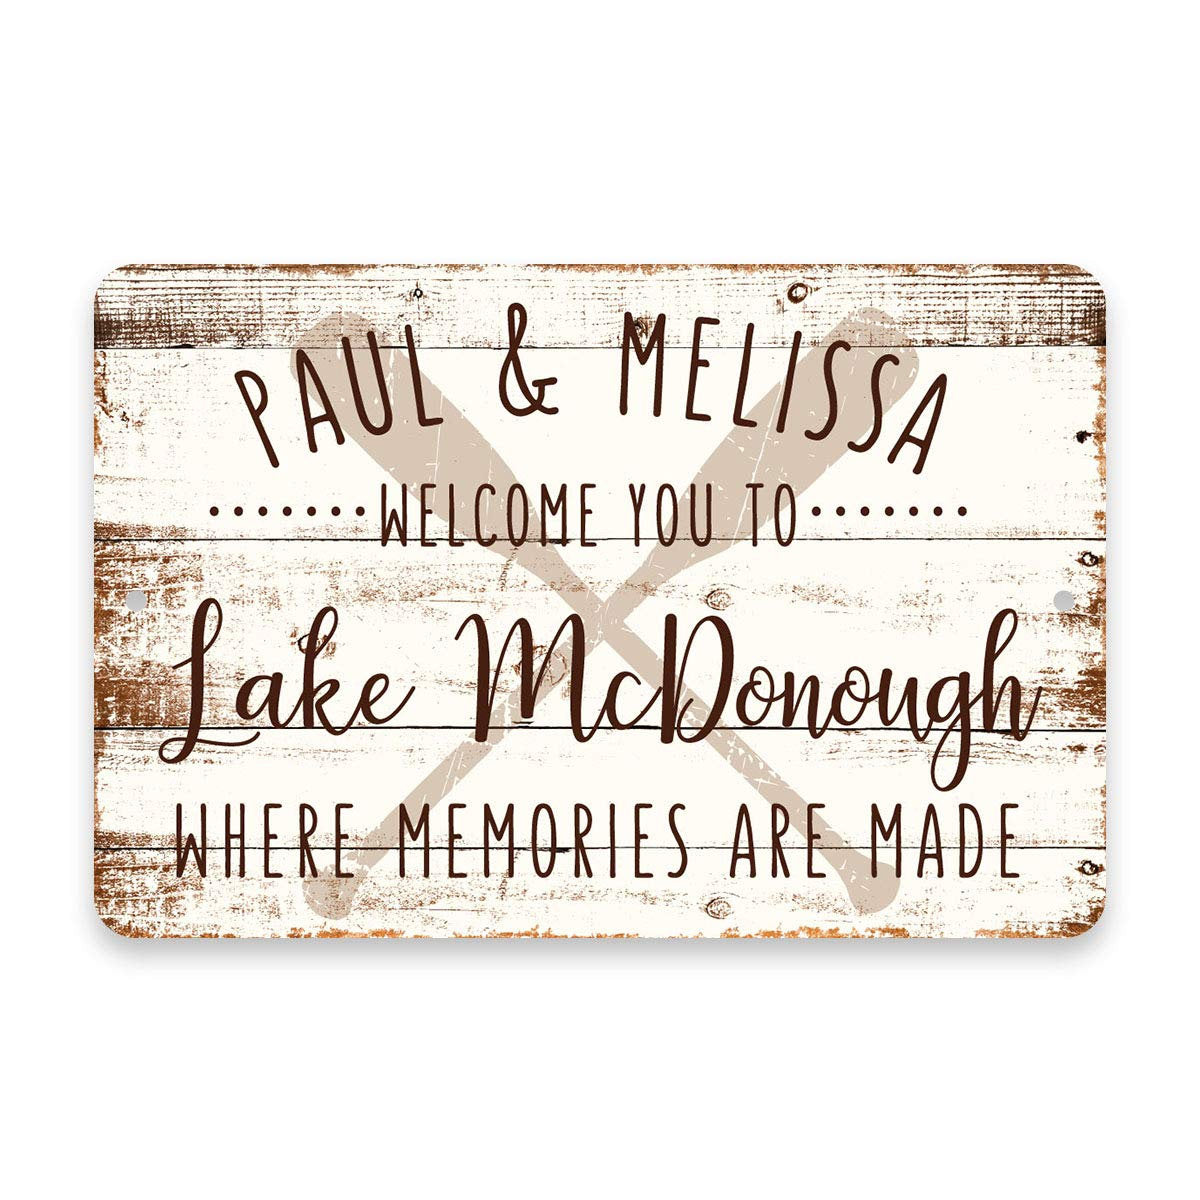 Personalized Welcome to Lake McDonough Where Memories are Made Sign - 8 X 12 Metal Sign with Wood Look